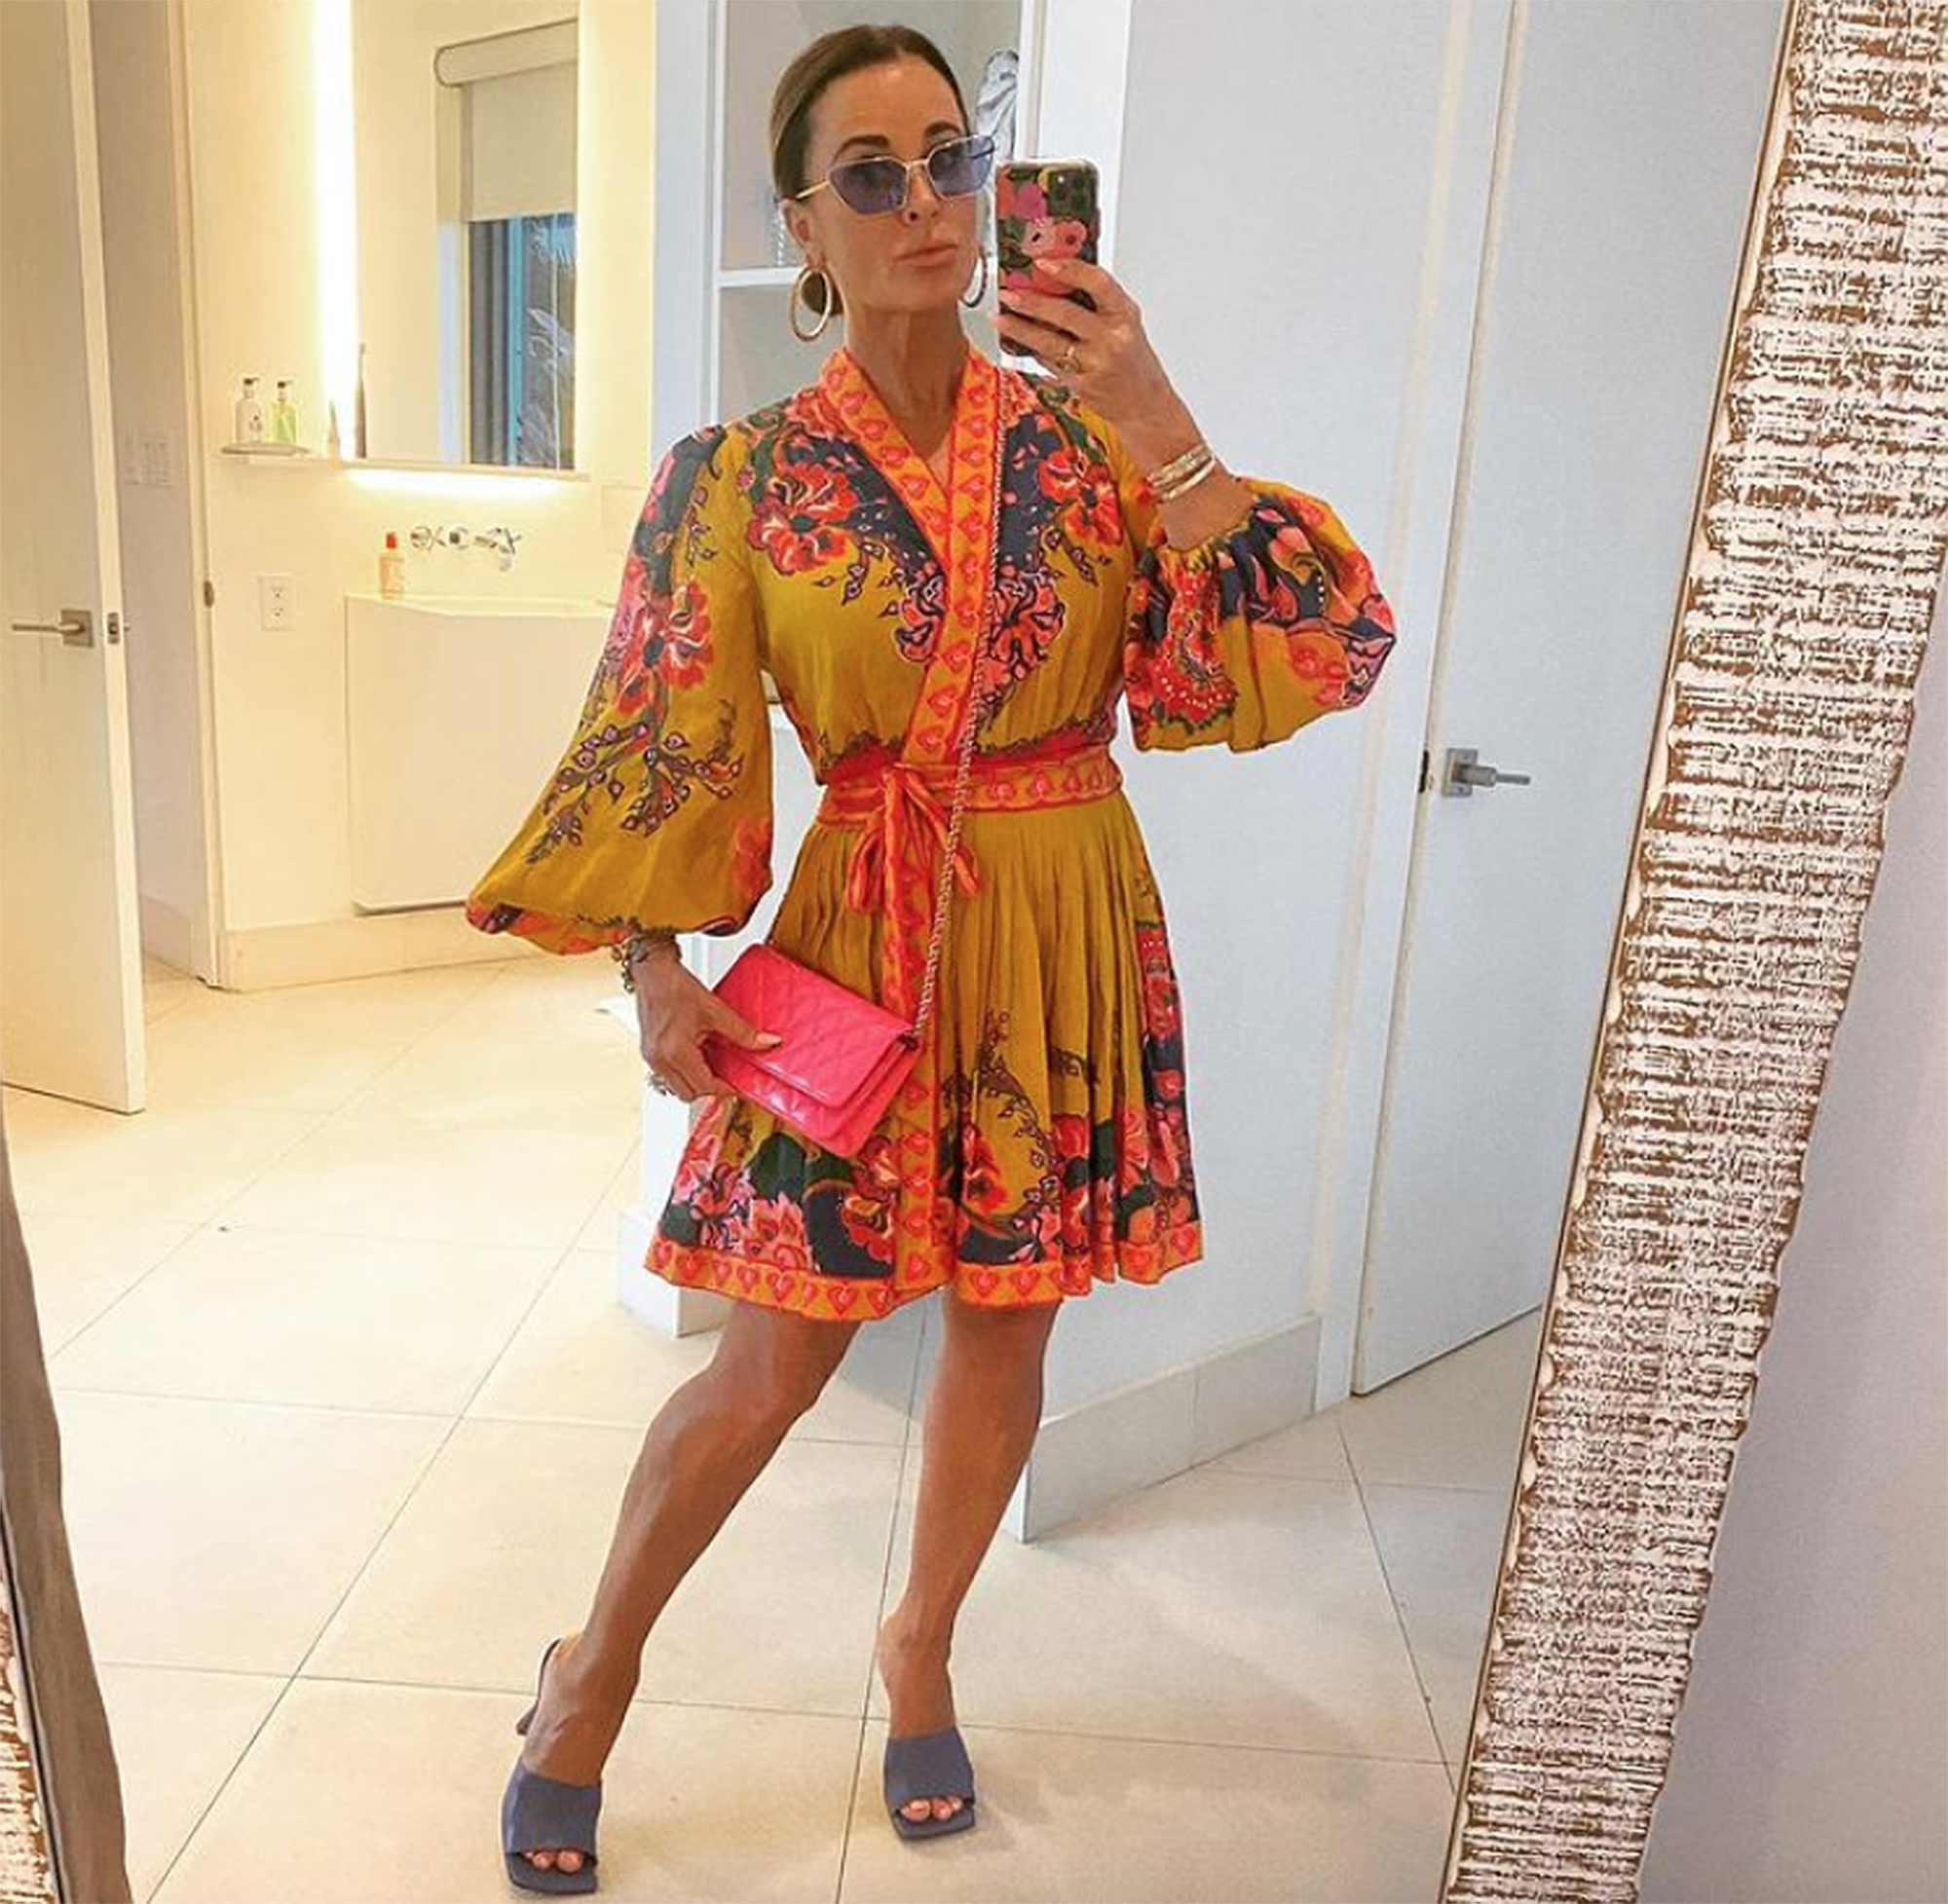 Kyle Richards looks summer-ready with bright yellow bag